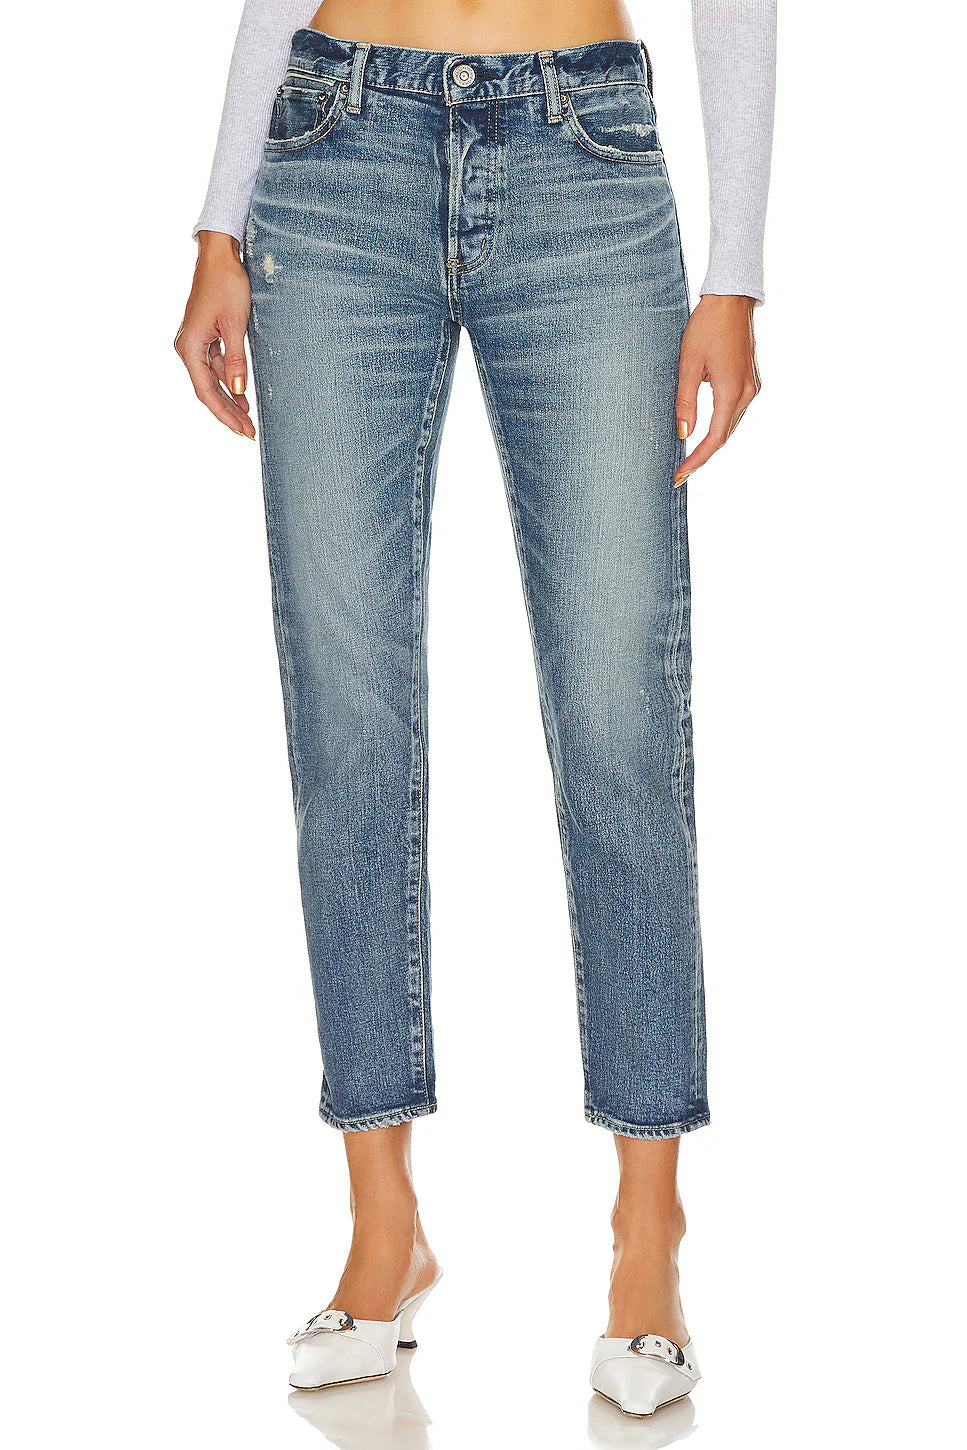 Moussy Avenal Tapered Mid Rise Jeans